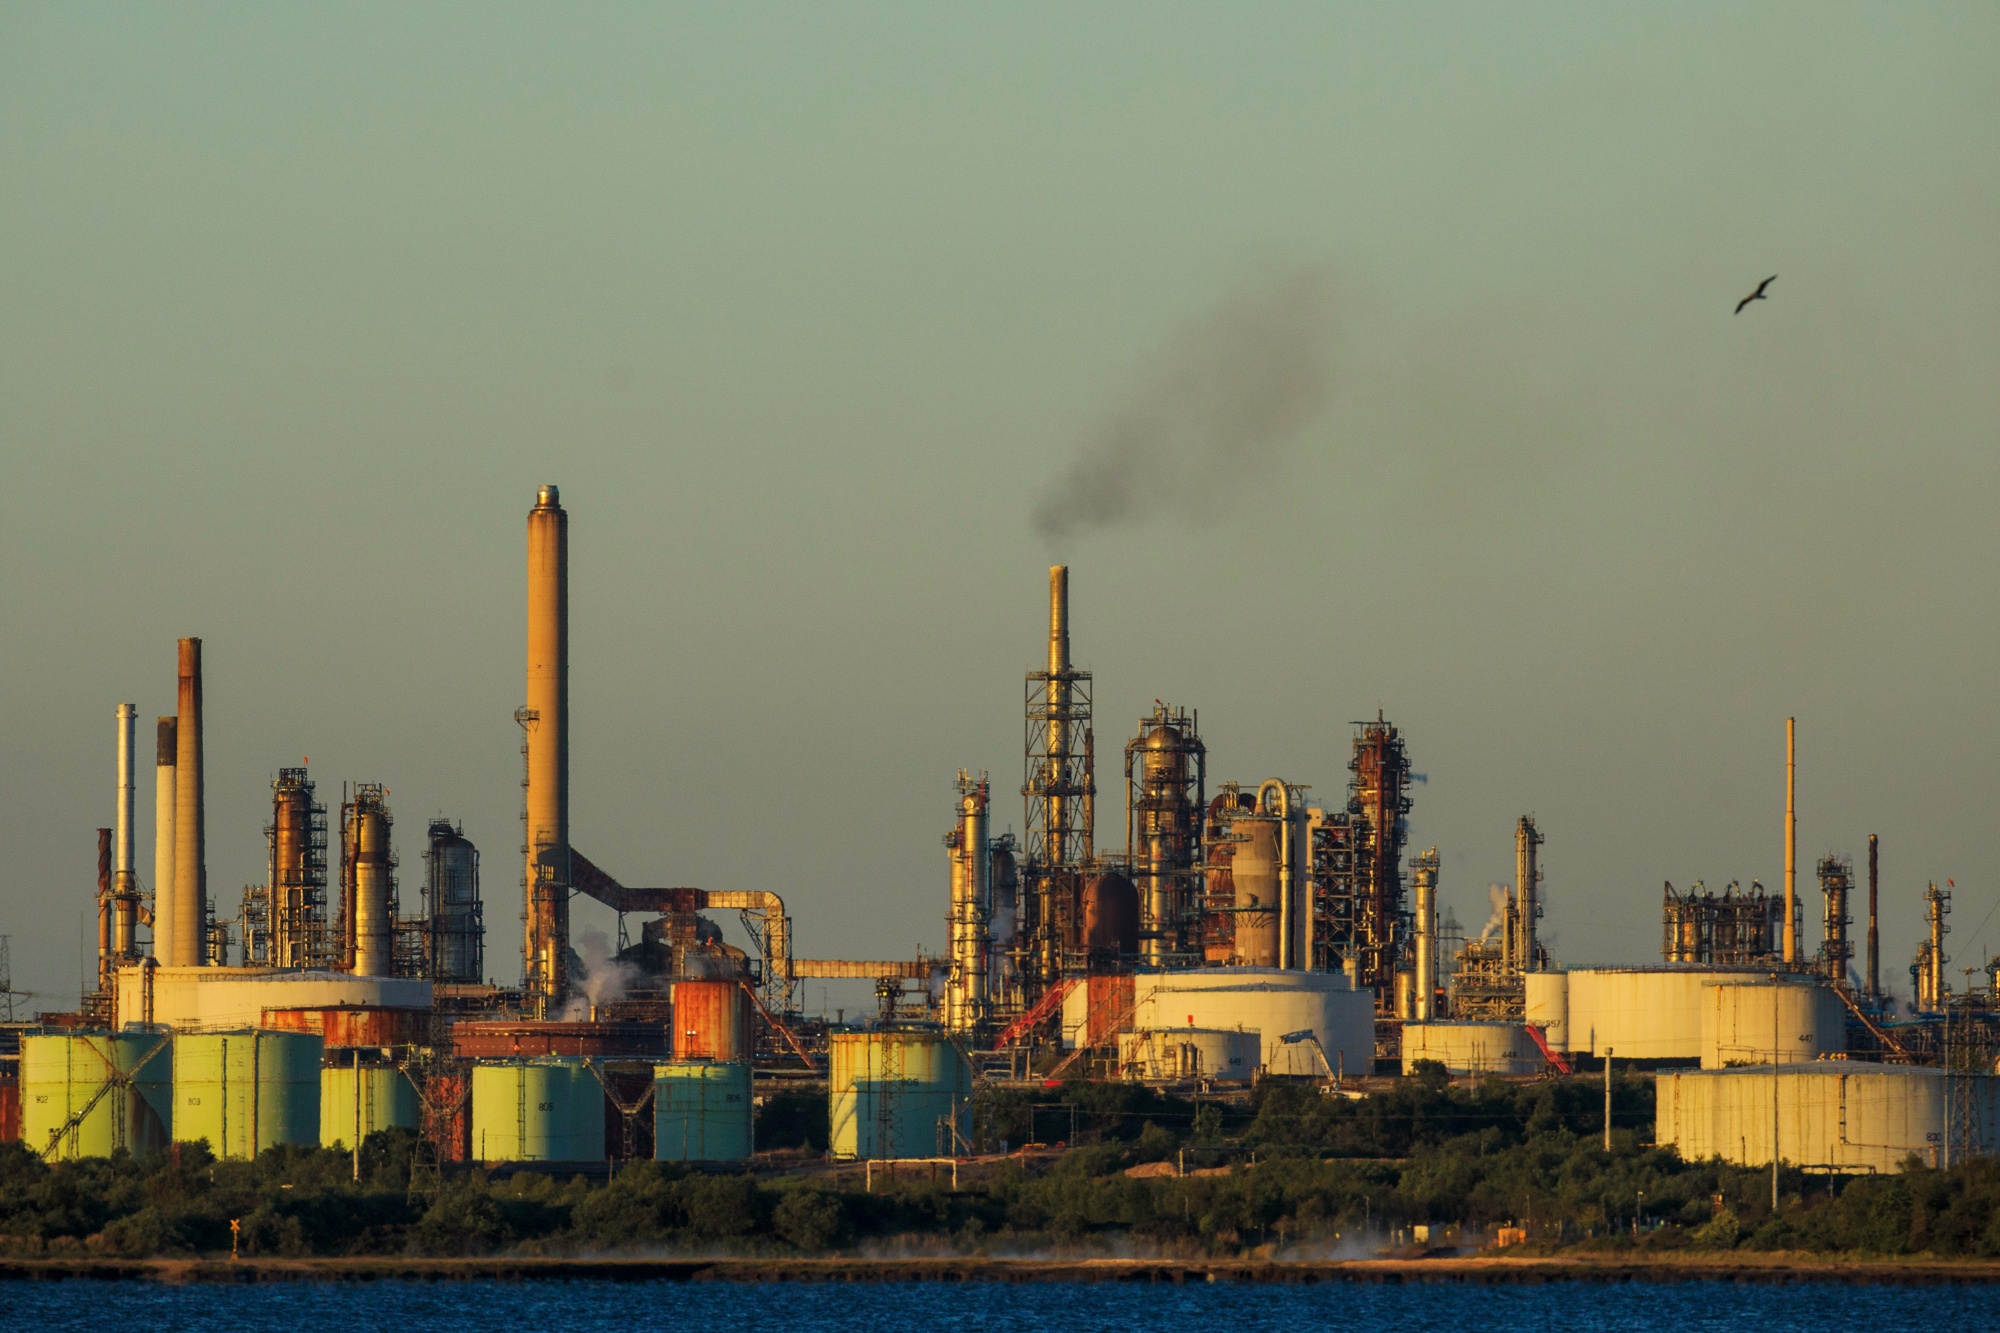 Fawley Oil Refinery As Commodity Likely To Avoid Repeat Negative Price Shock